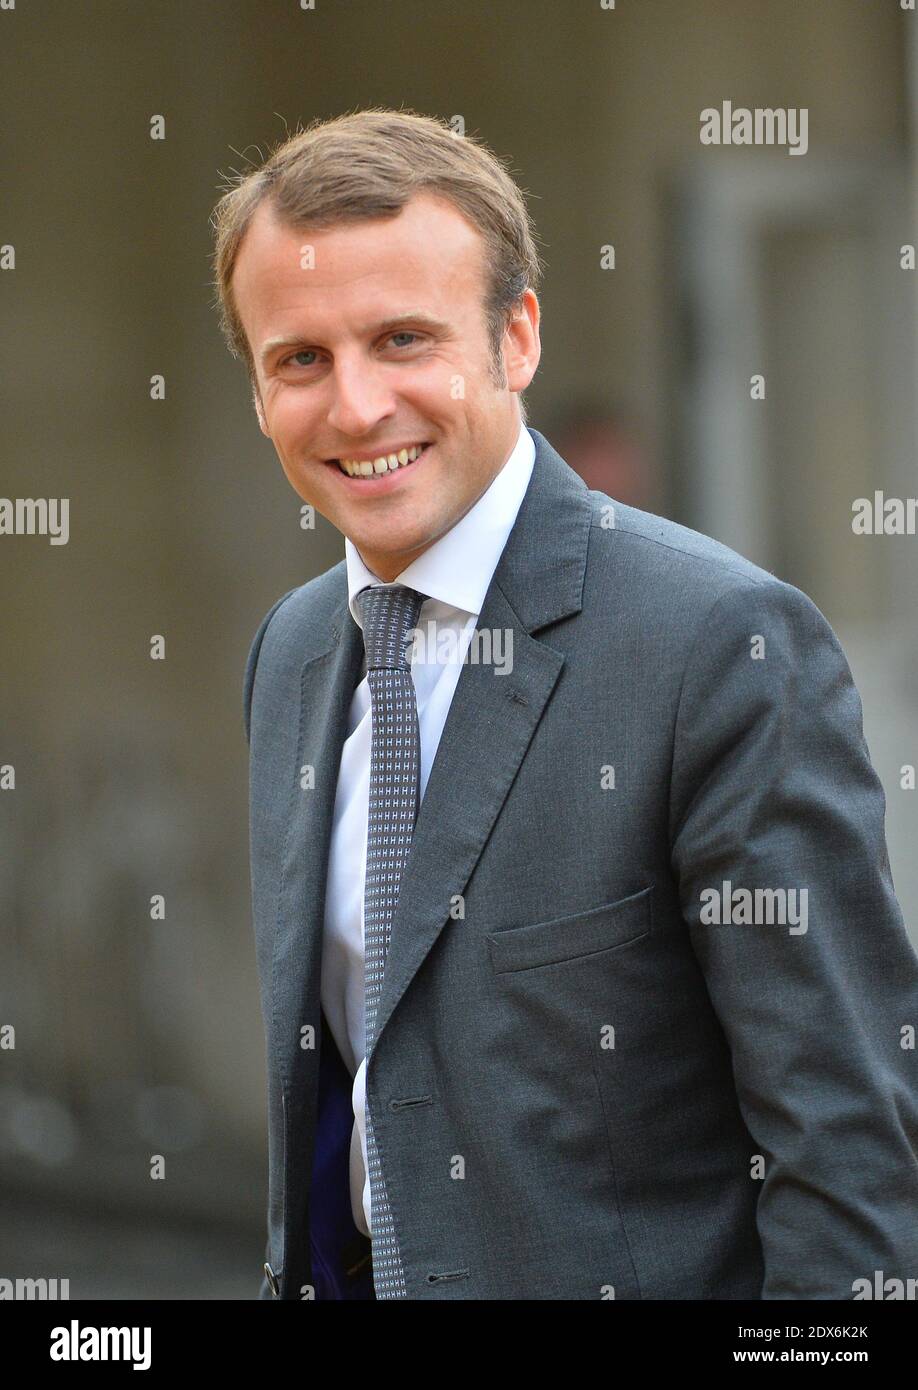 Newly-appointed Economy Minister Emmanuel Macron arriving at the Elysee presidential palace in Paris, France before a weekly cabinet meeting. French President Francois Hollande on August 27 installed a former banker and ally as economy minister in an emergency reshuffle seen as the 'last chance' to haul France out of the biggest crisis of his presidency. Hollande caught everyone off guard with the appointment of Emmanuel Macron, a 36-year-old ex-Rothschild banker and architect of the president's economic policy. Photo by Christian Liewig/ABACAPRESS.COM Stock Photo